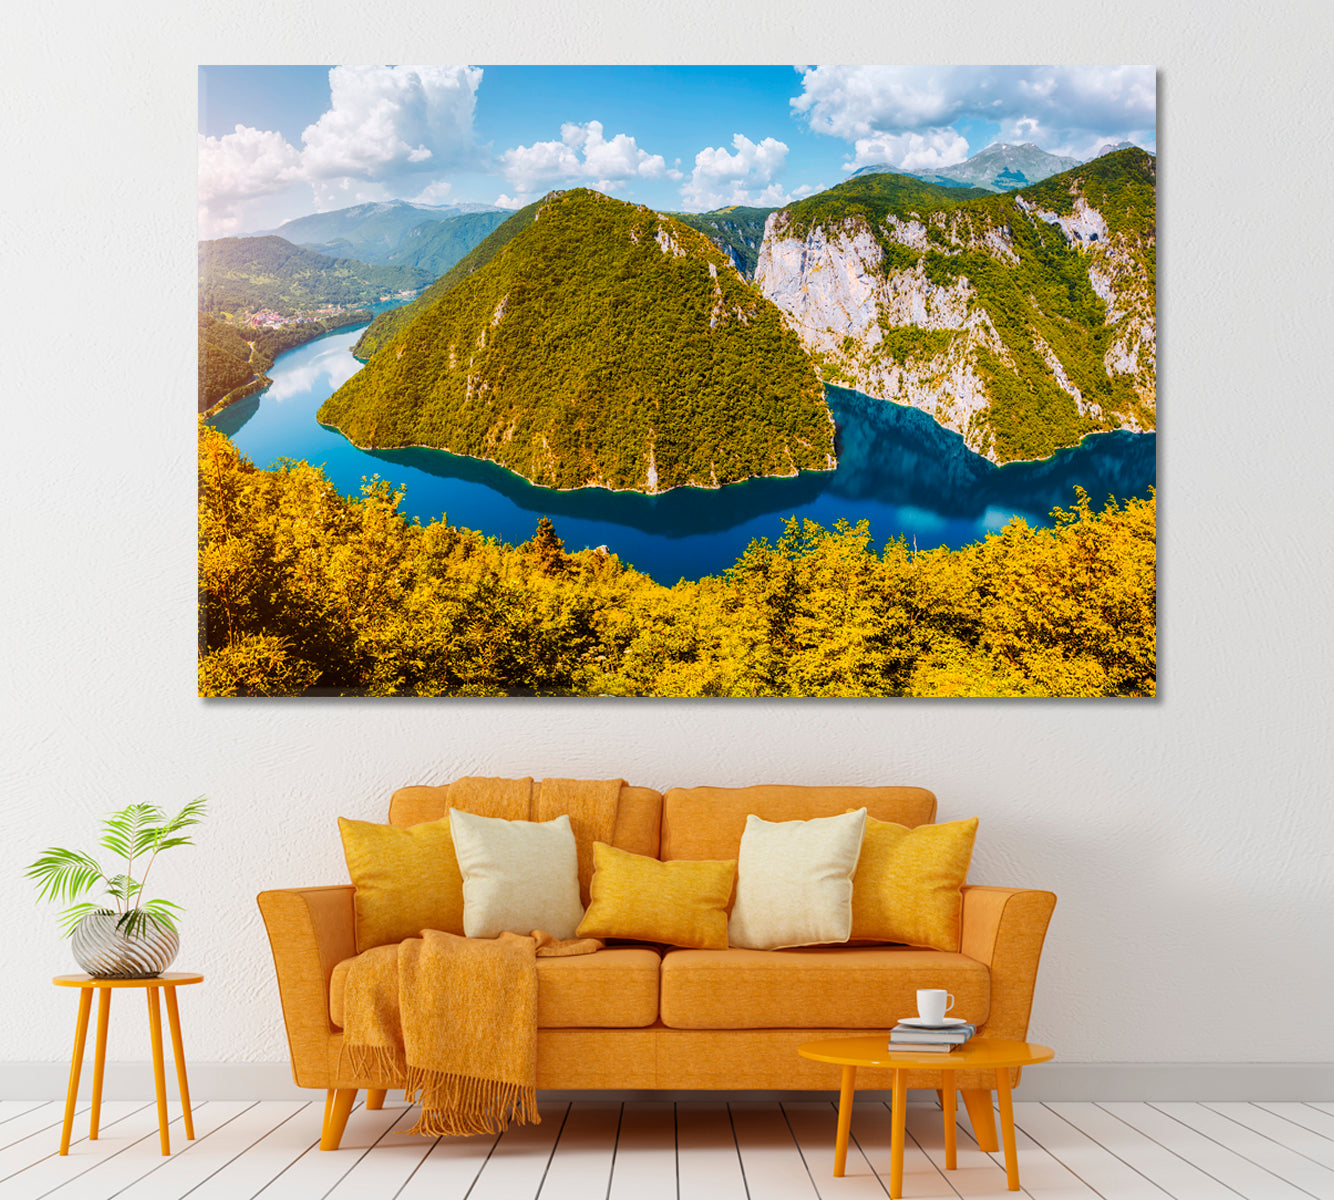 Great Canyon of River Piva Montenegro Canvas Print ArtLexy 1 Panel 24"x16" inches 